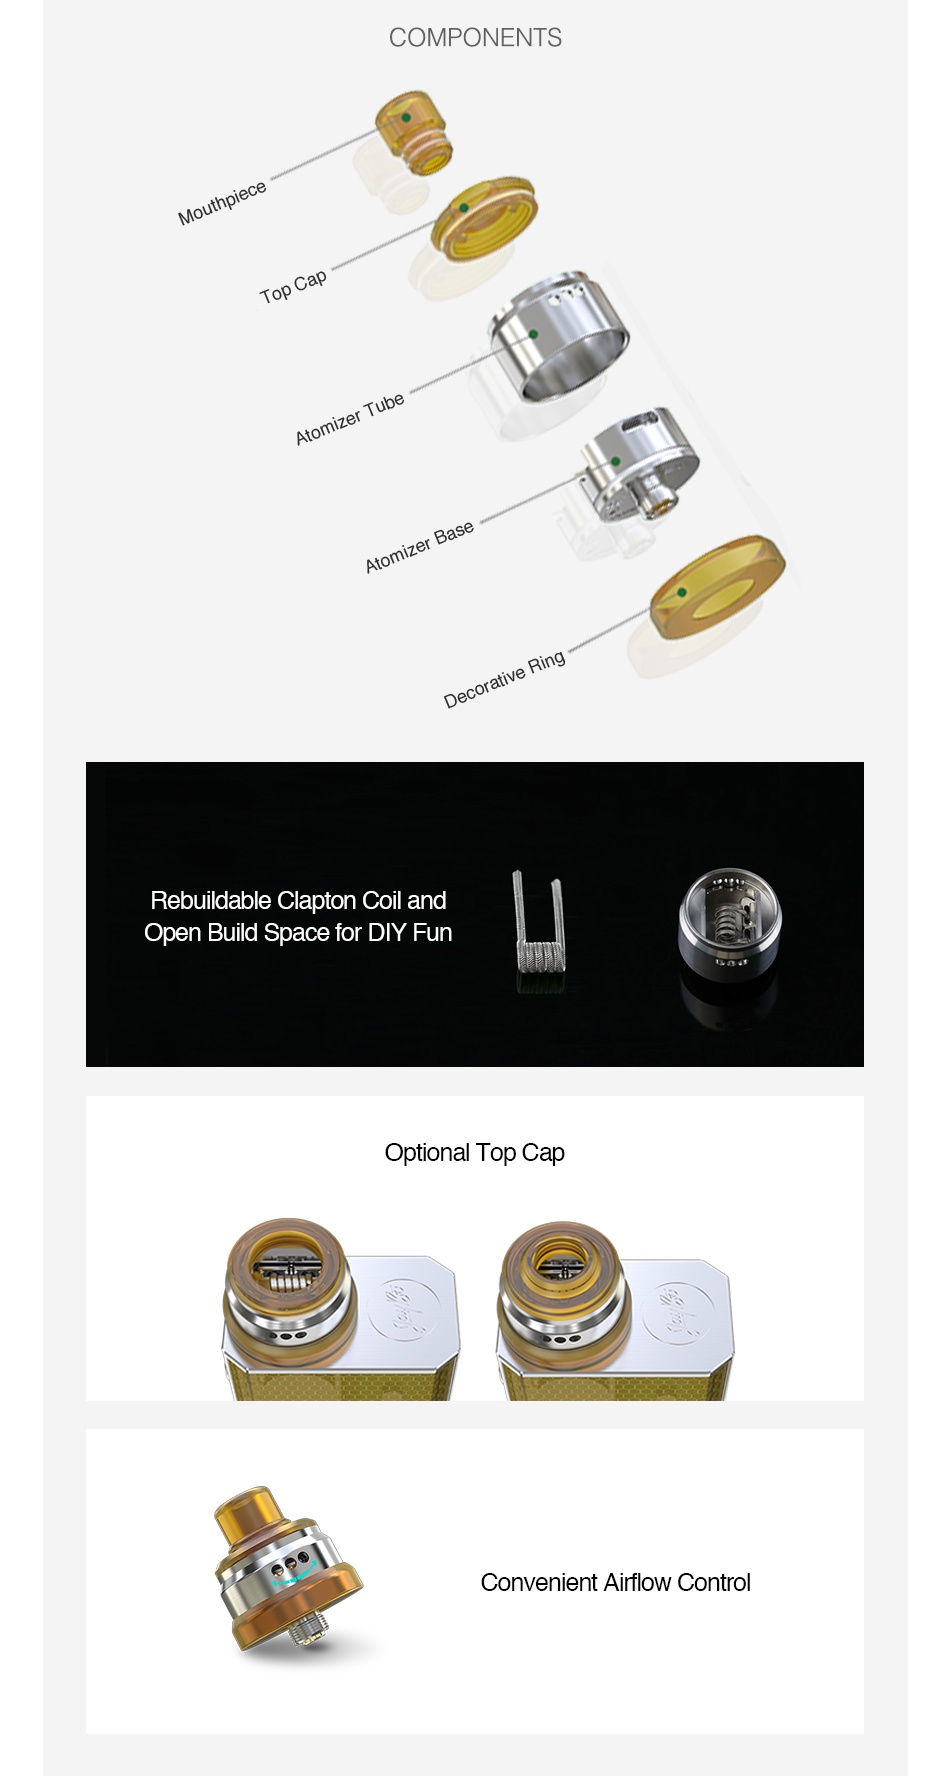 WISMEC Tobhino BF RDA COMPONENTS Atomizer Base Rebuildable Clapton Coil and Open Build space for DIY Ful Optional Top cap Convenient airflow contro